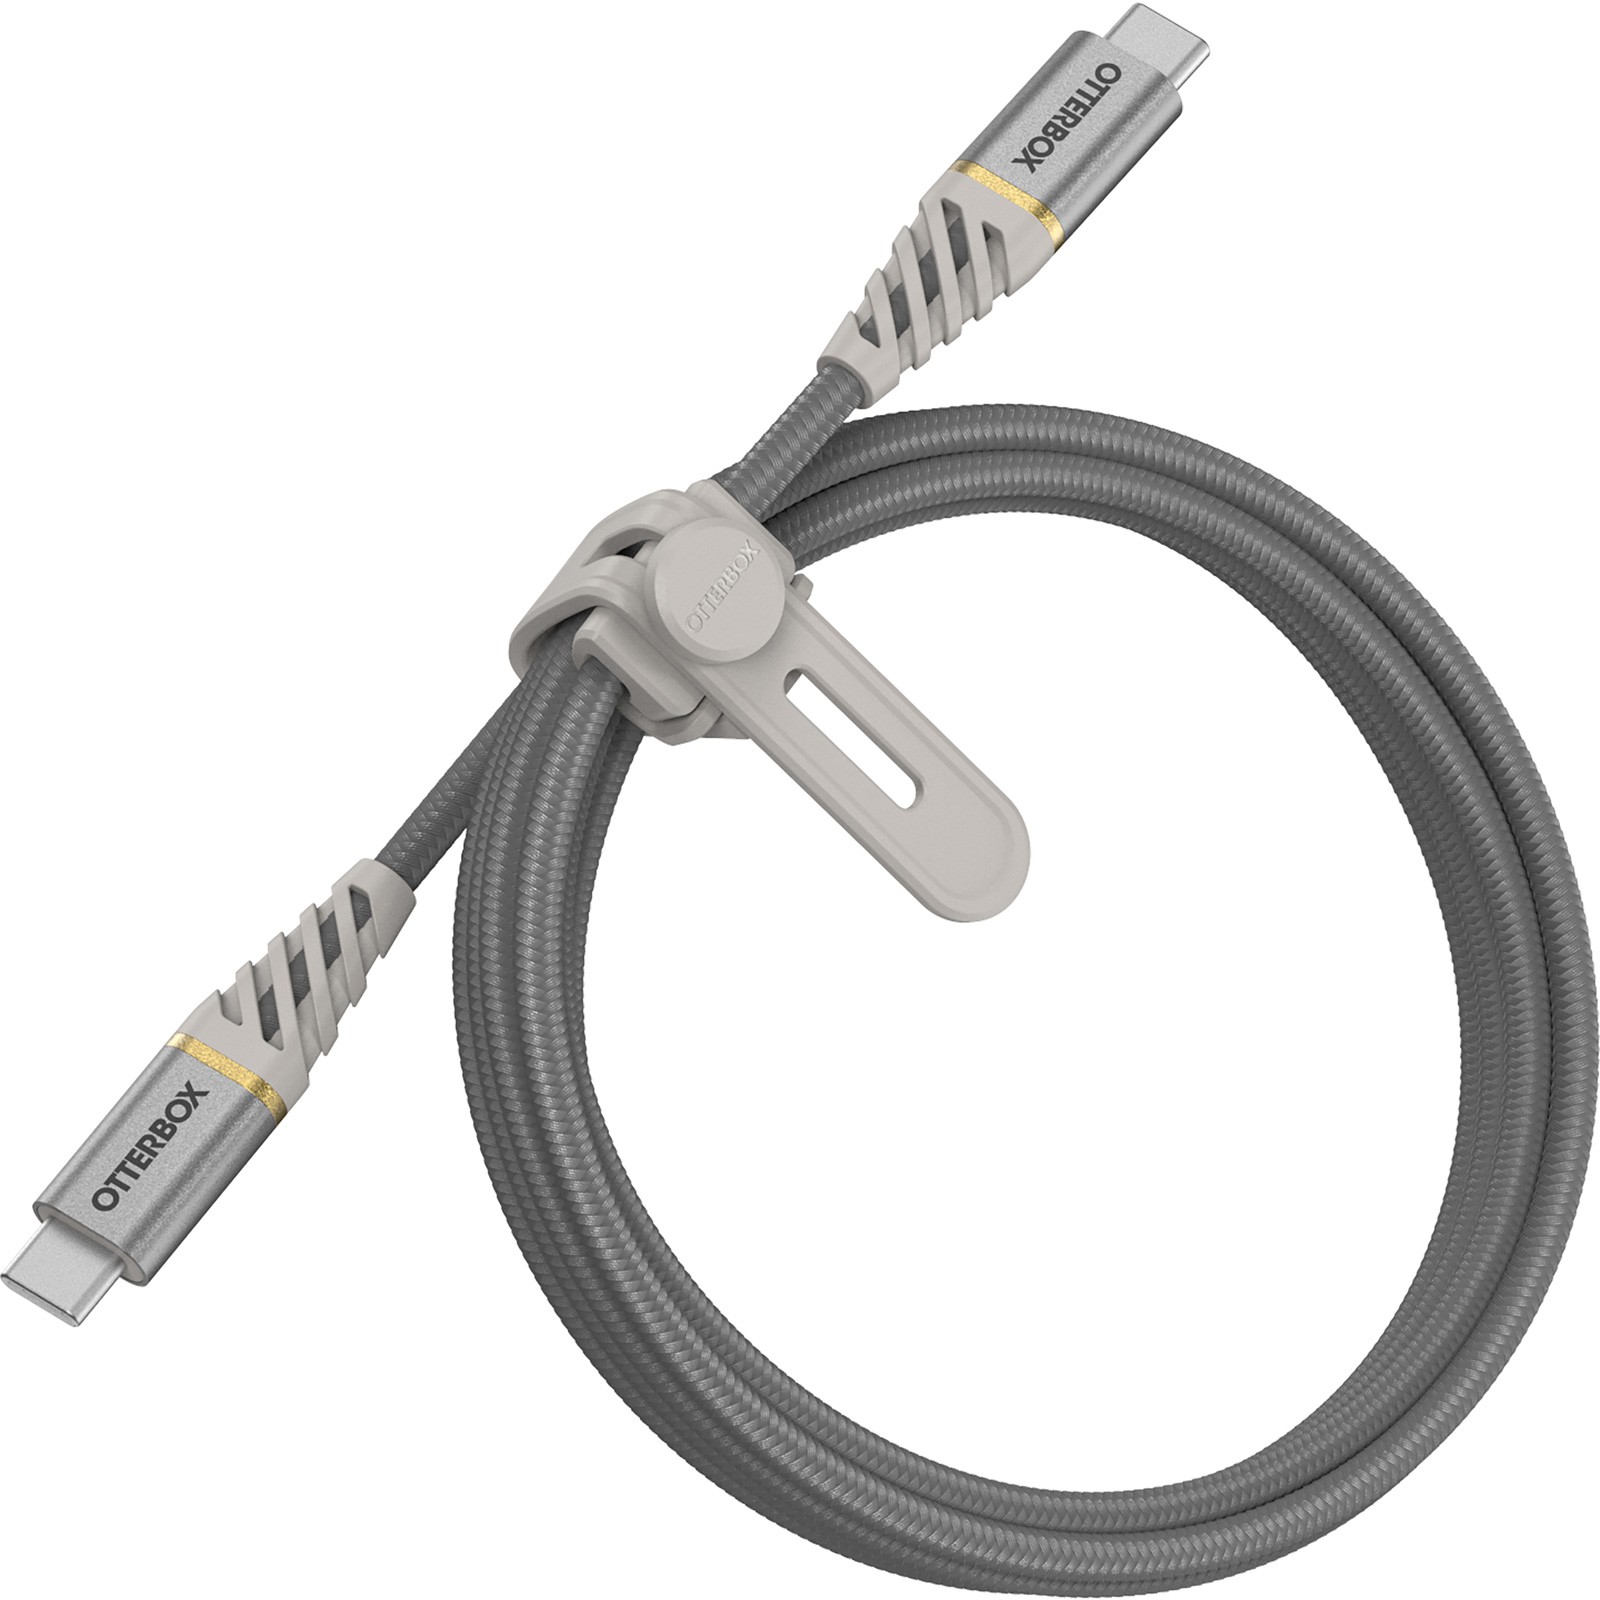 USB-C to USB-C Fast Charge Cable – Premium Silver Dust